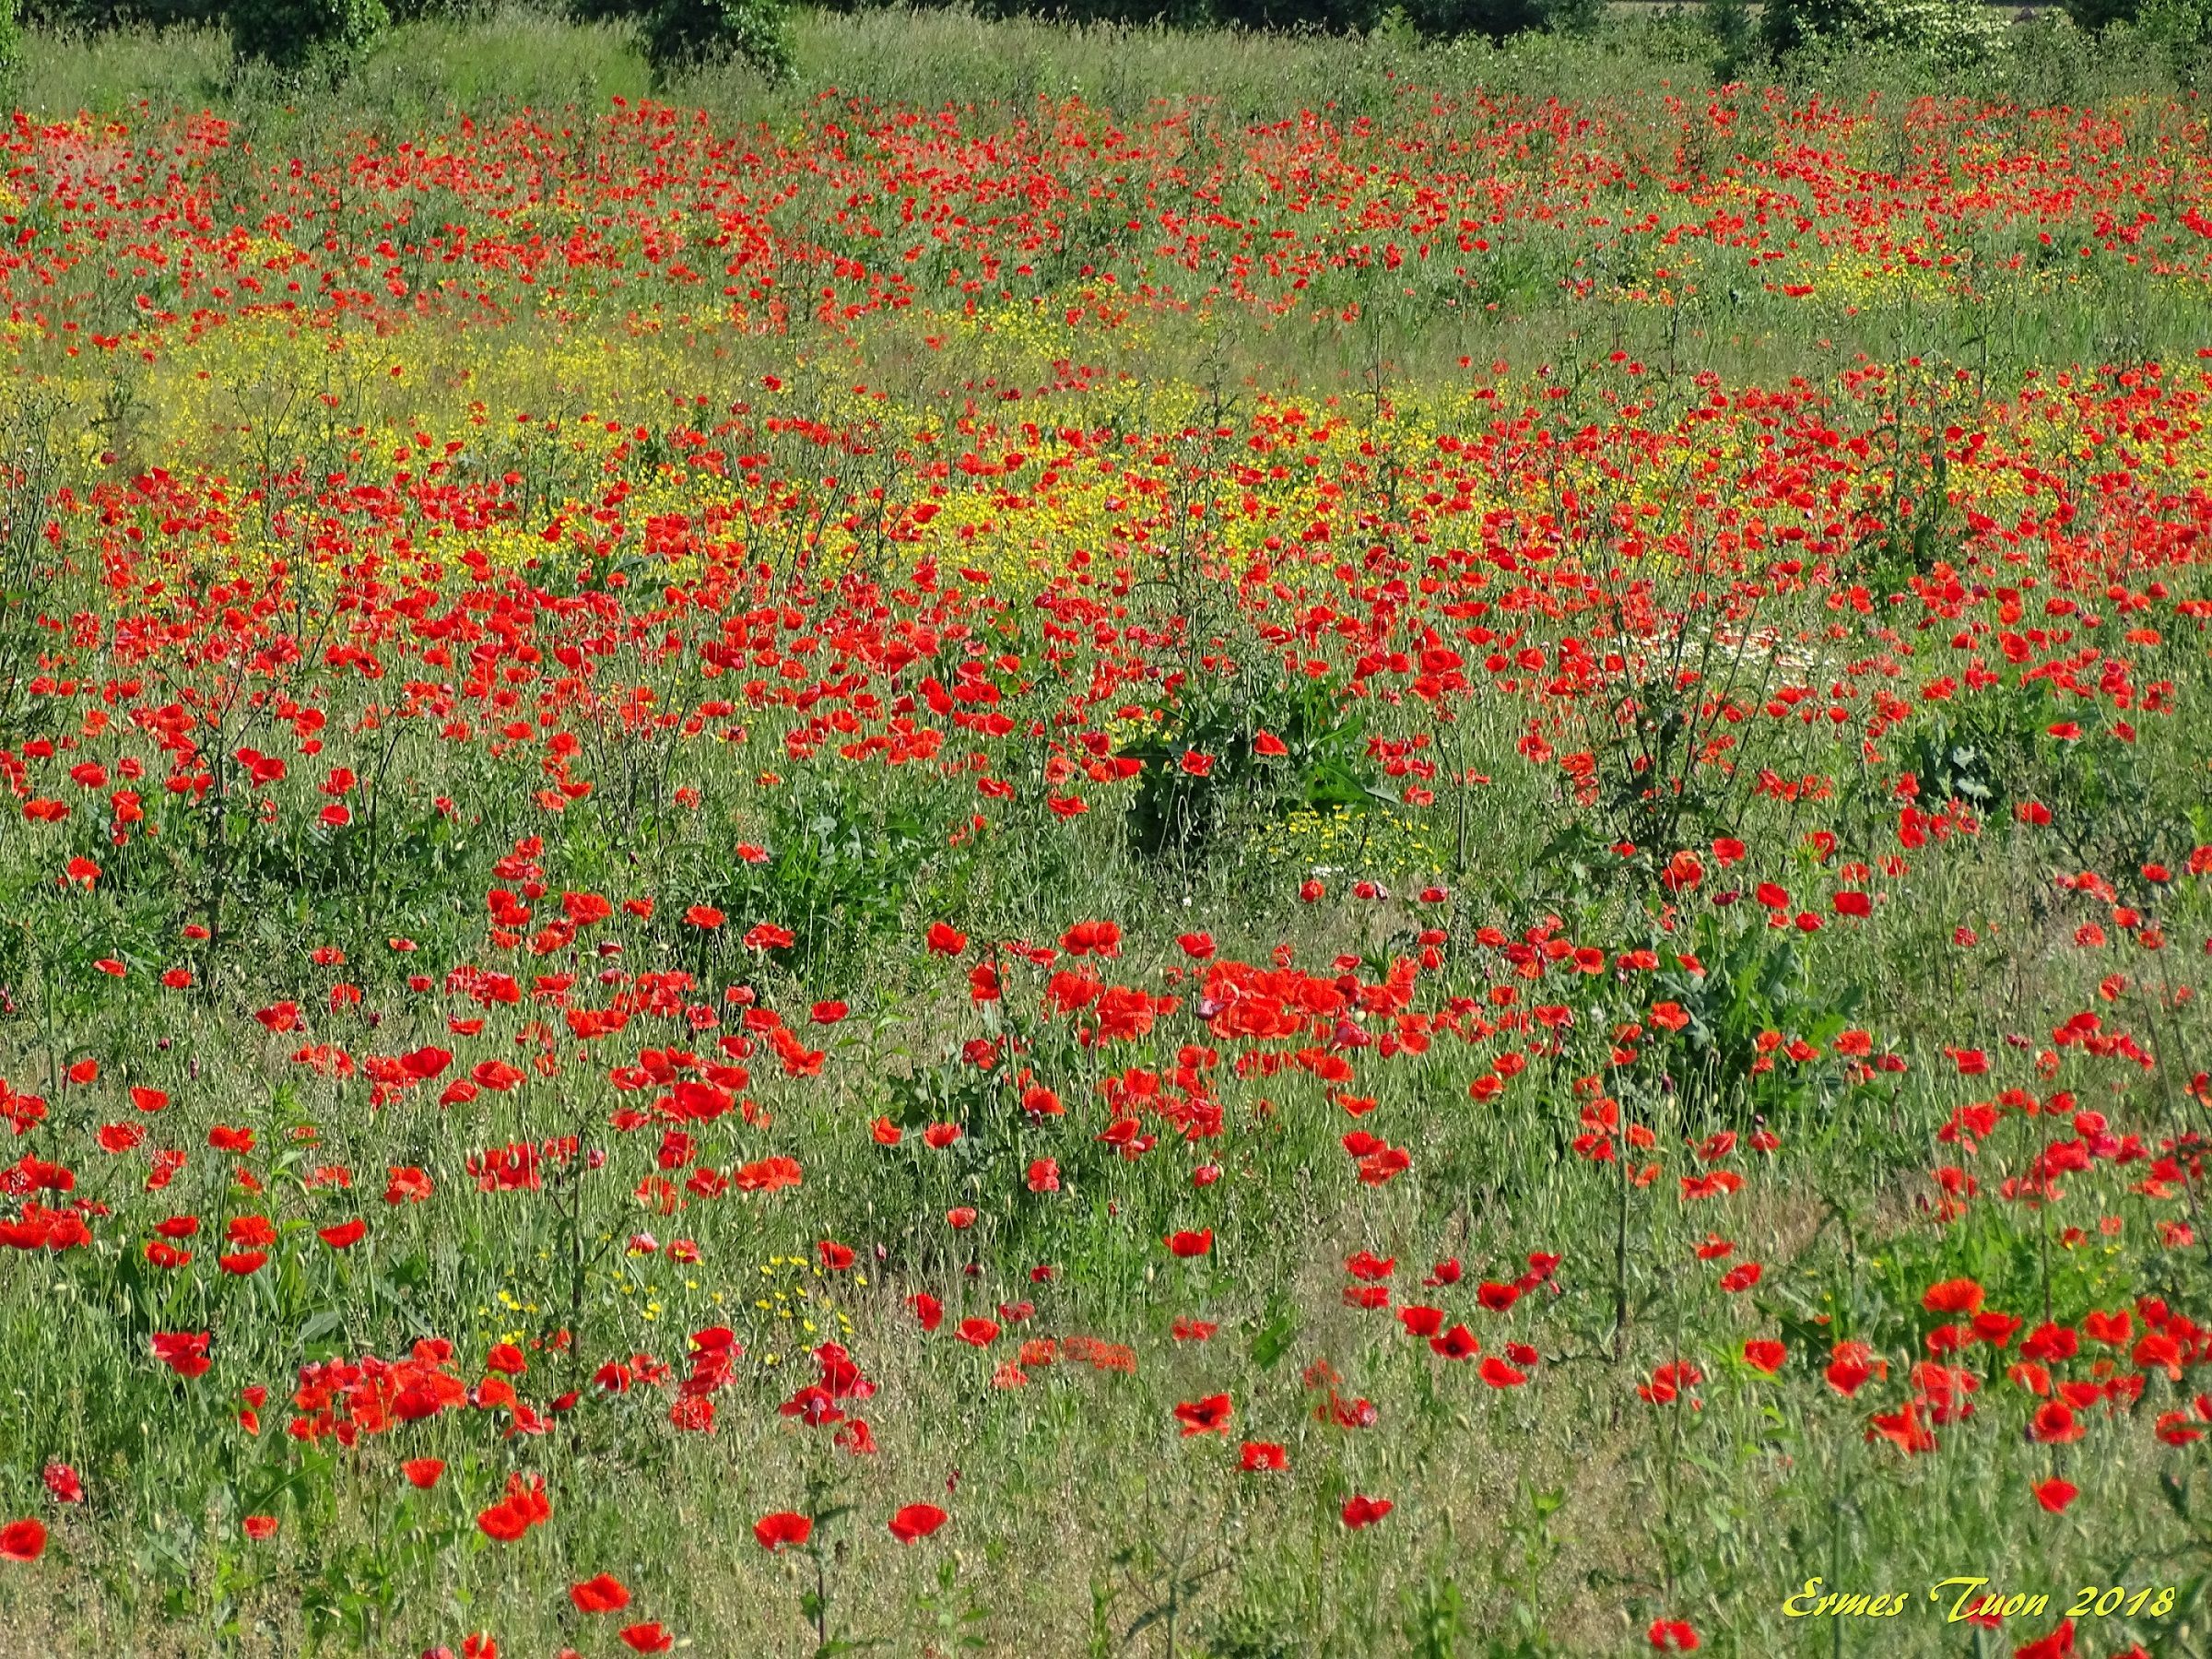 poppies on springtime - Local Guide @ermest